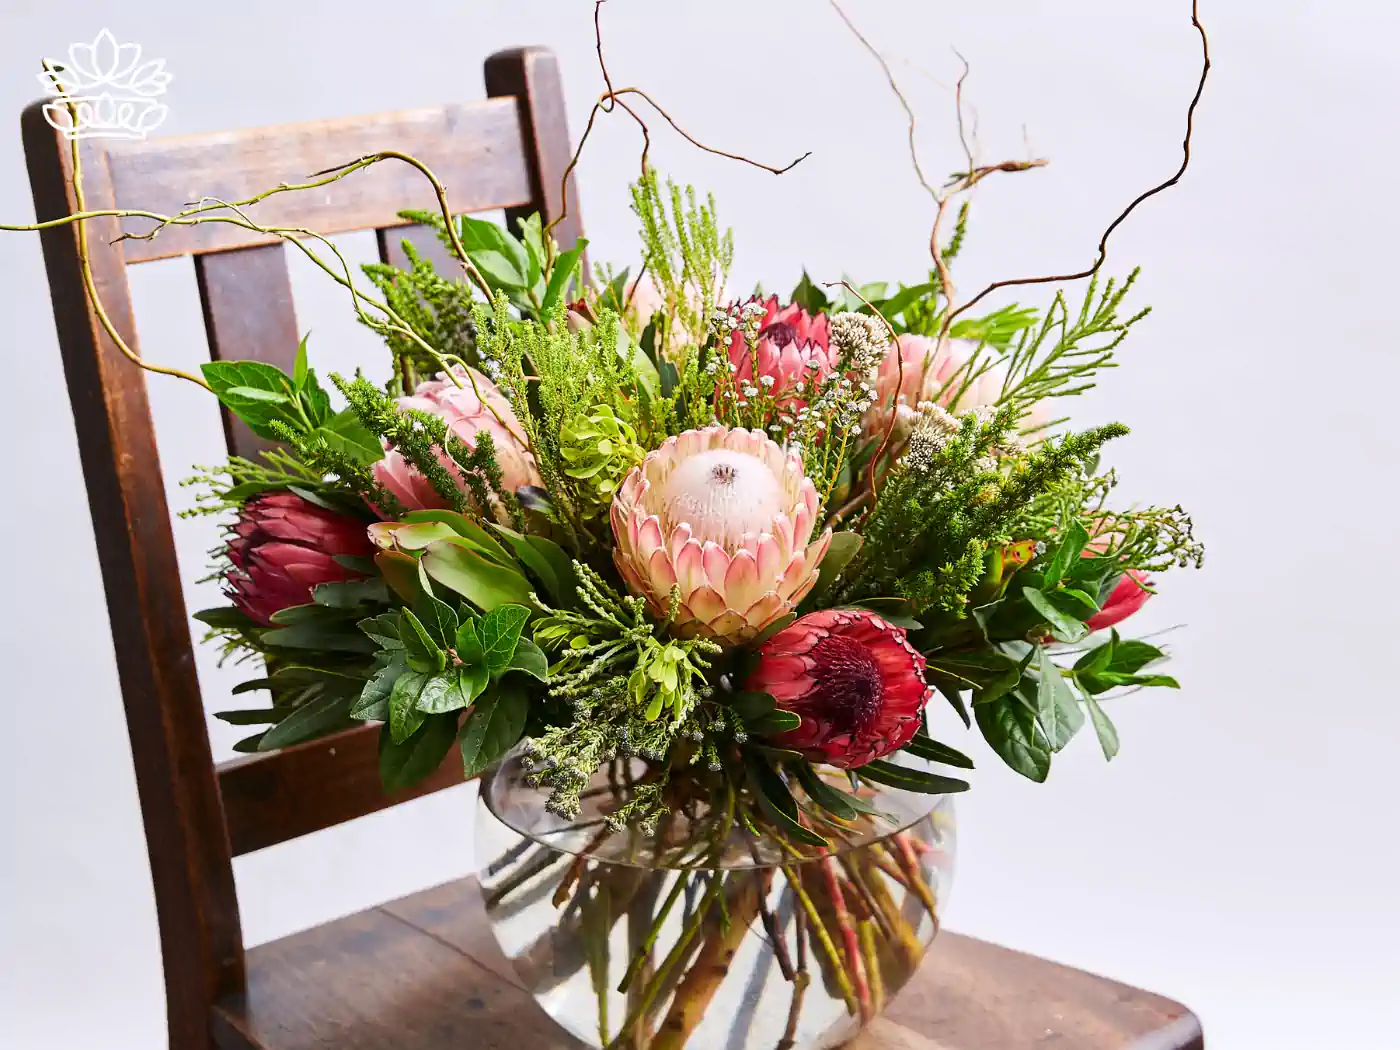 Exquisite arrangement of proteas and mixed foliage in a glass vase, artistically placed on a wooden chair. Fabulous Flowers and Gifts, Guest House and Hotel Gift Boxes Delivered with Heart.